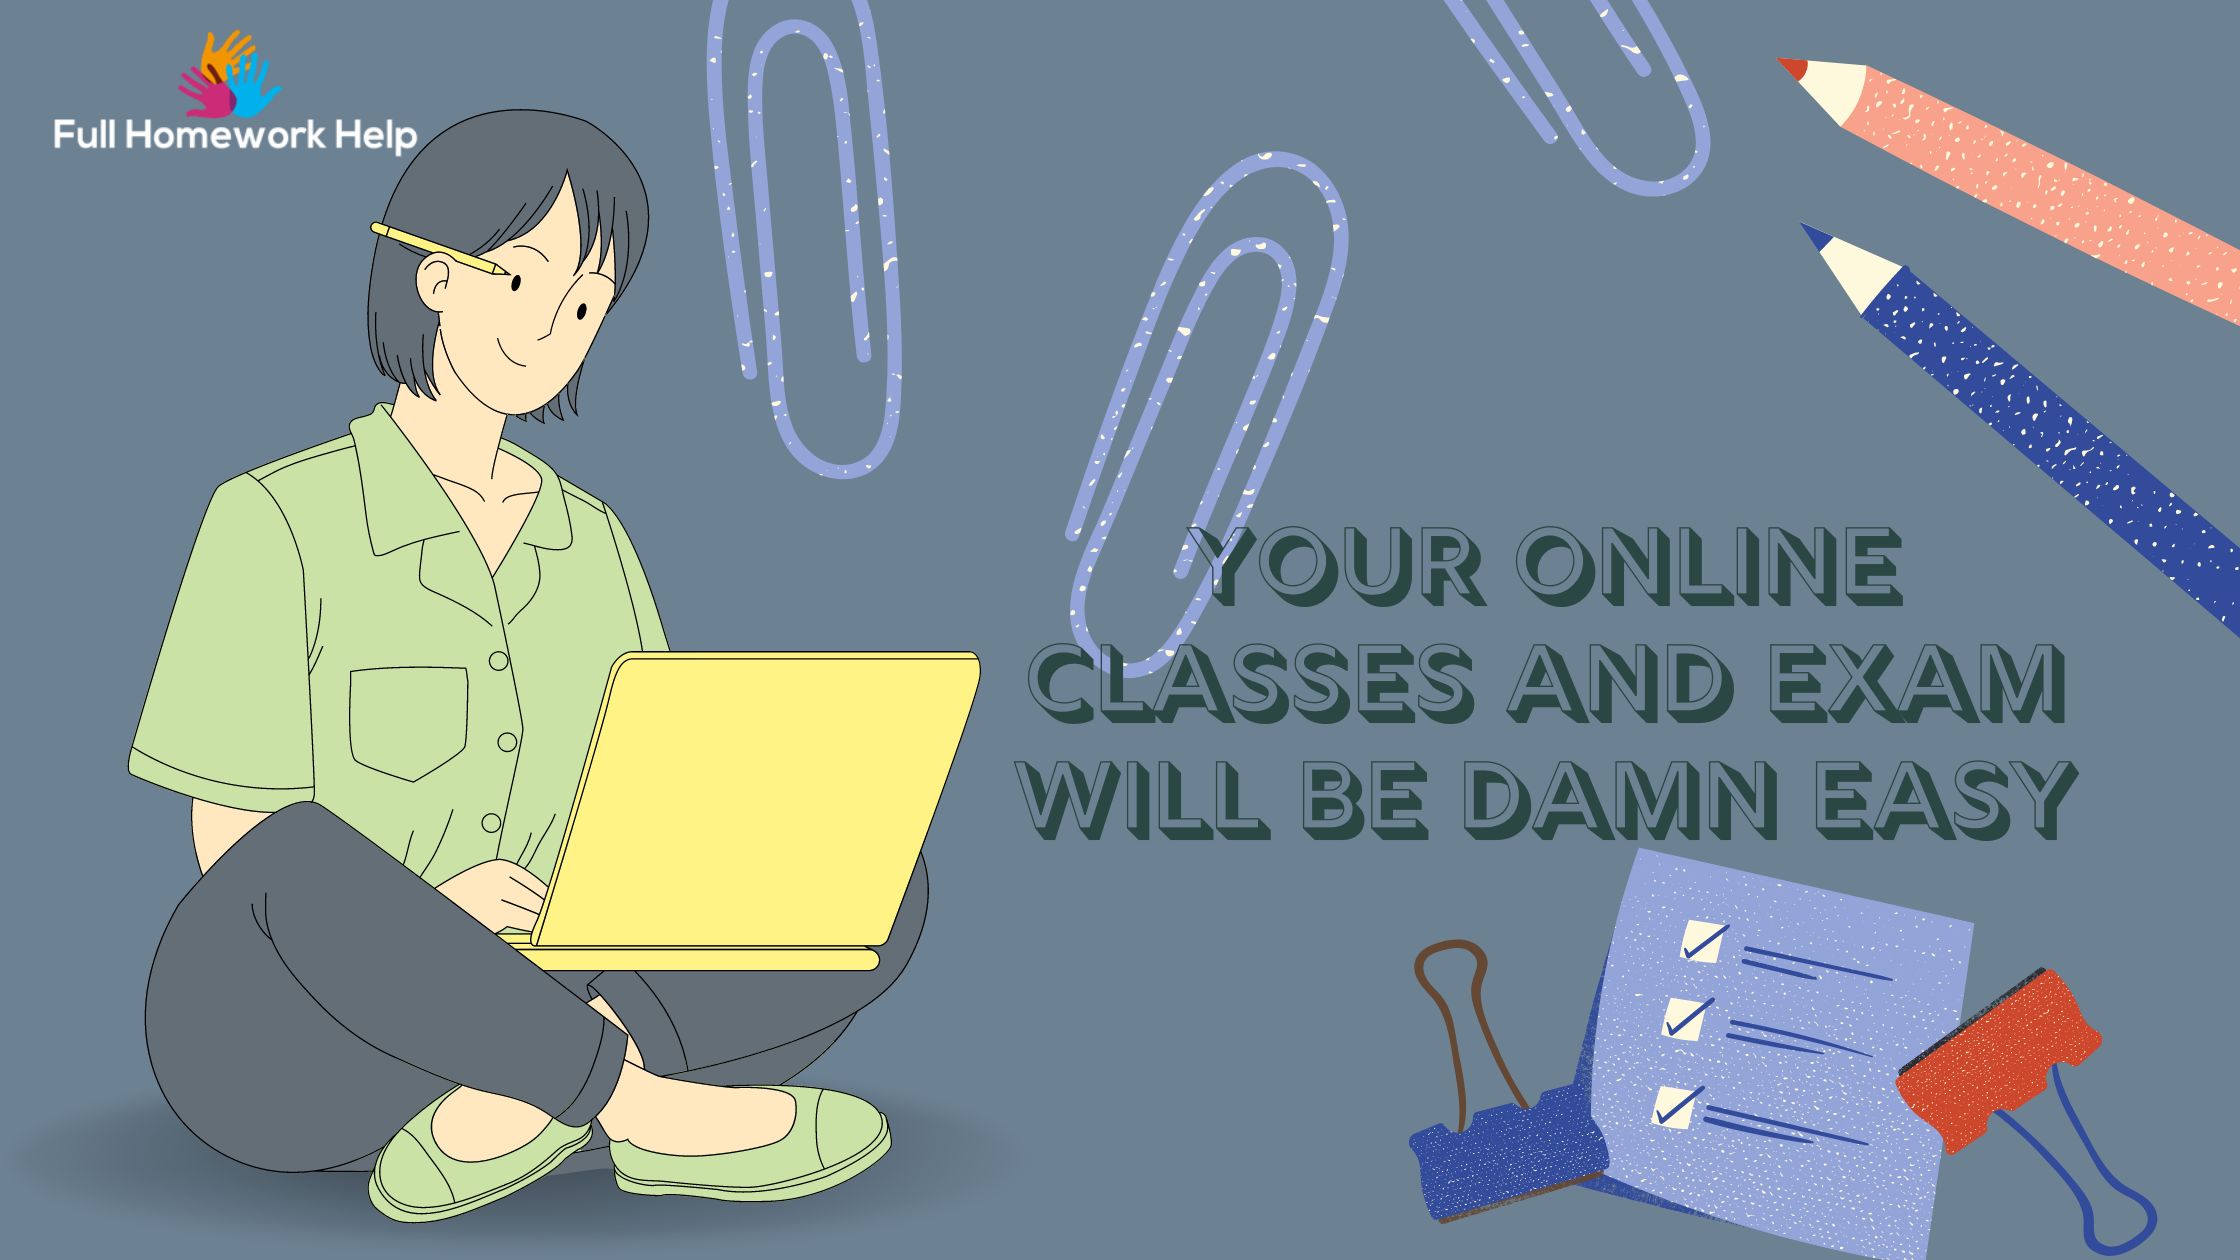 Your online classes and exam will be damn easy